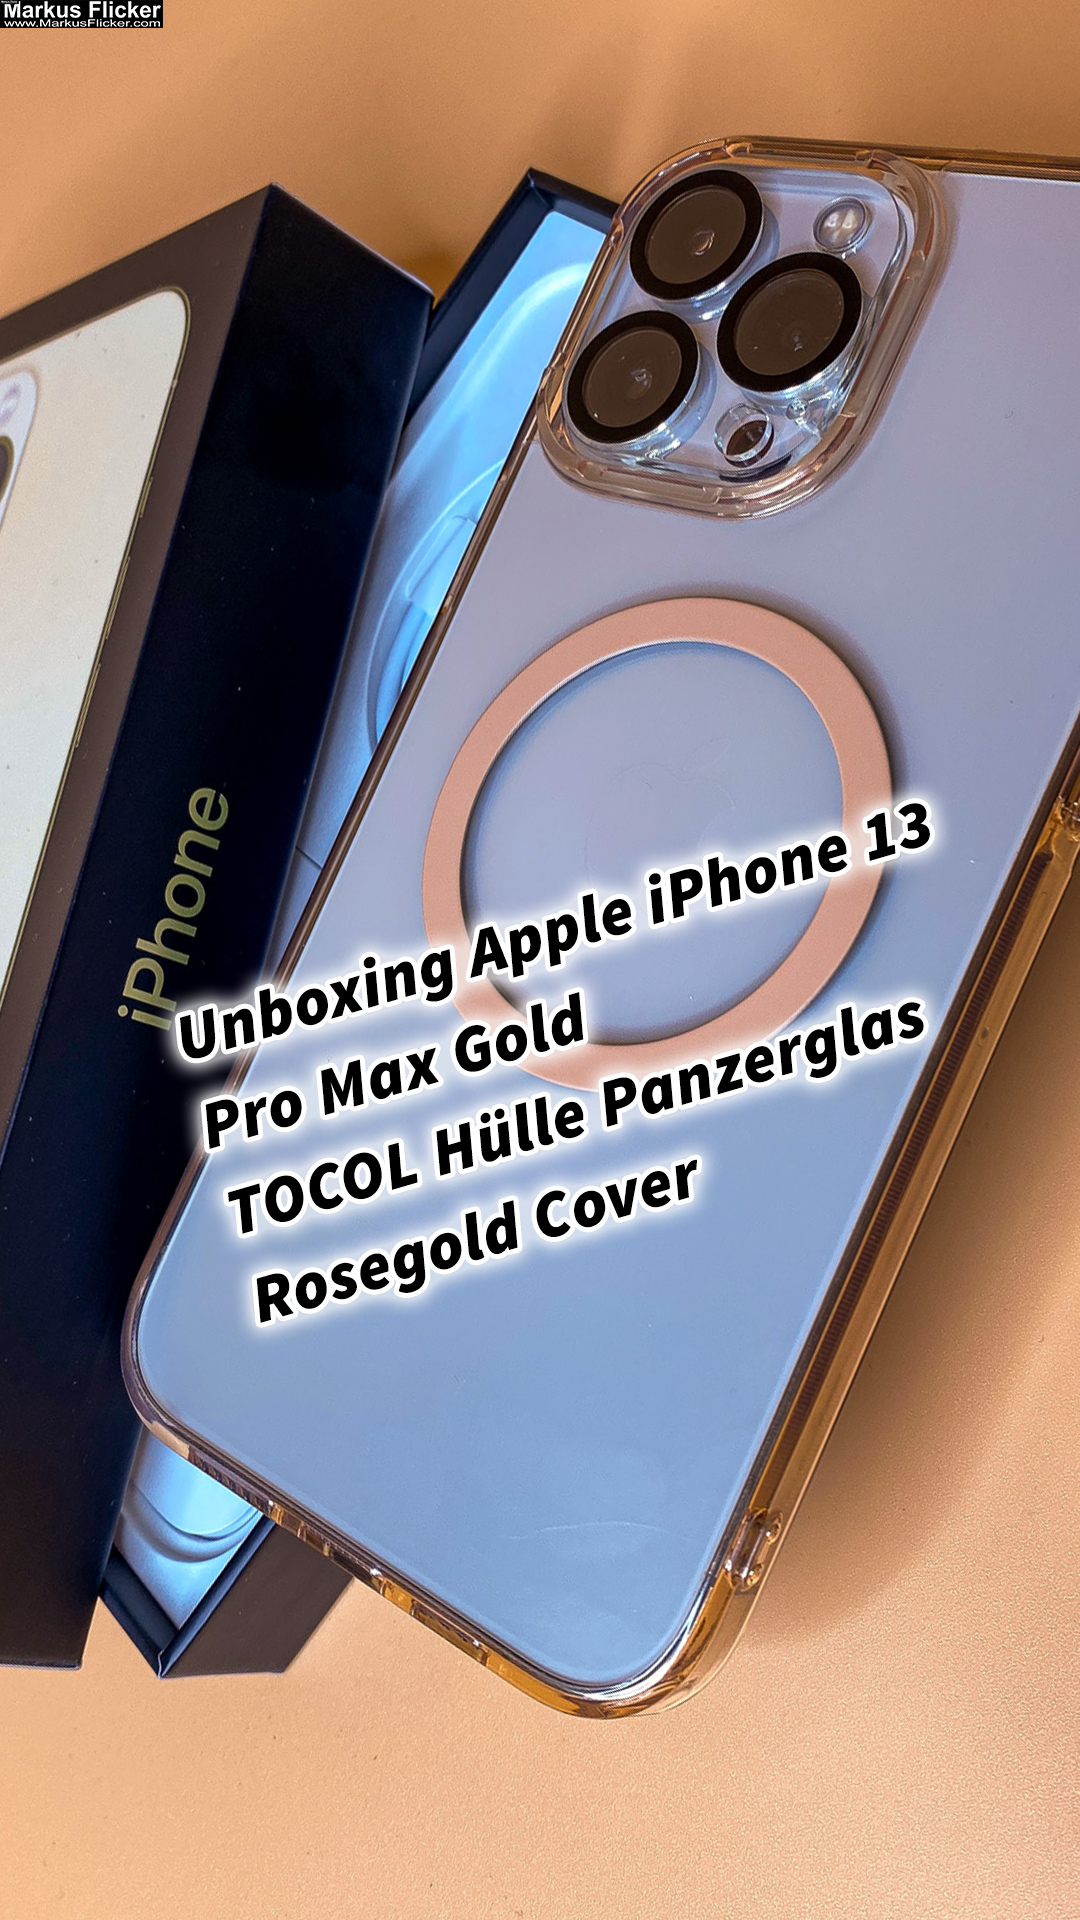 Unboxing Apple iPhone 13 Pro Max Gold & TOCOL 3 In 1 Hülle mit Panzerglas Rosegold Cover